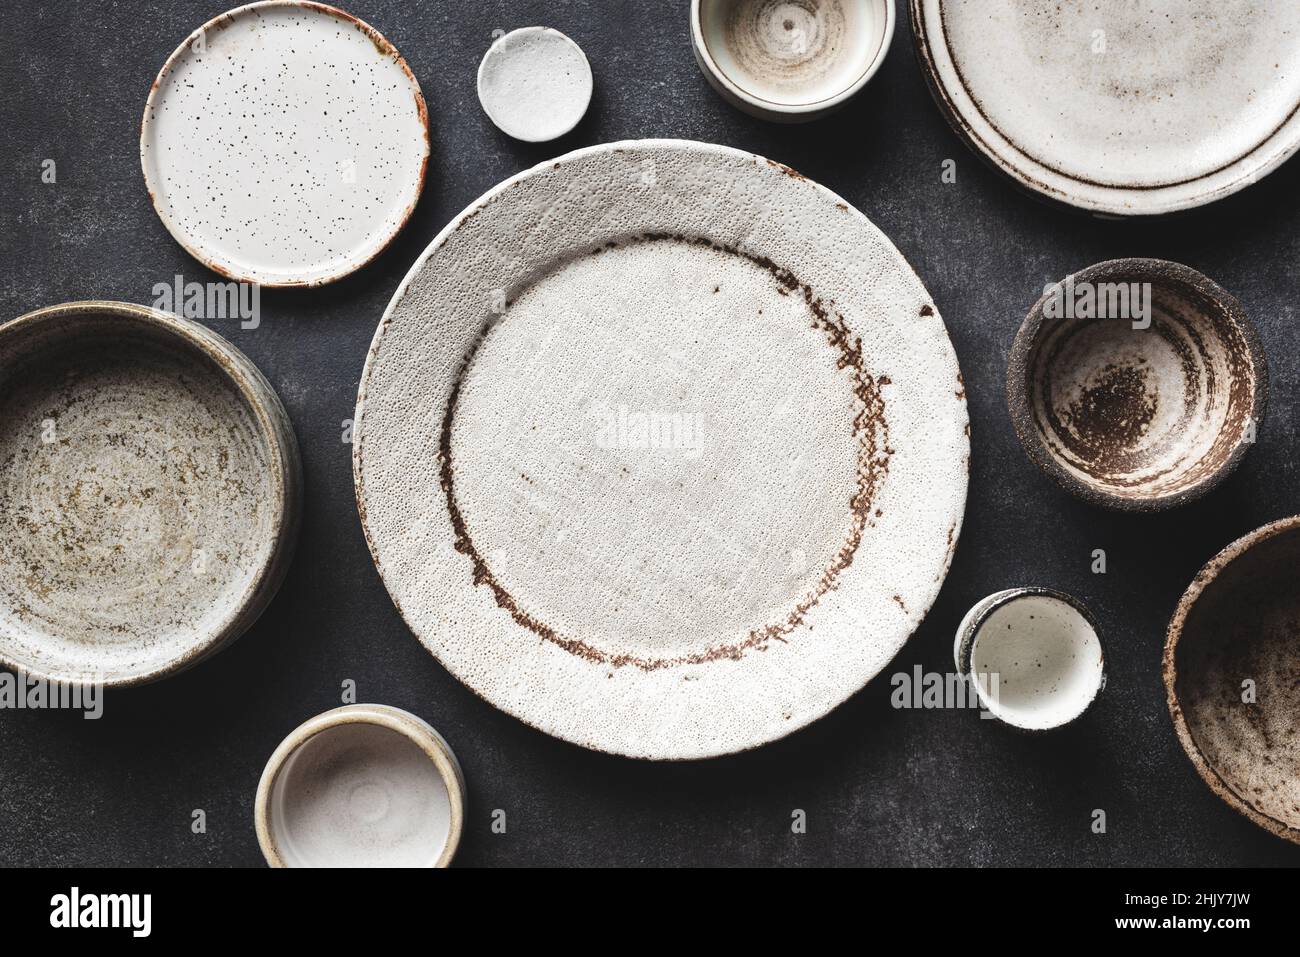 Modern Trendy Craft Ceramic Plates And Bowls On Concrete Table Background. Top View Copy Space. Kitchenware Stock Photo